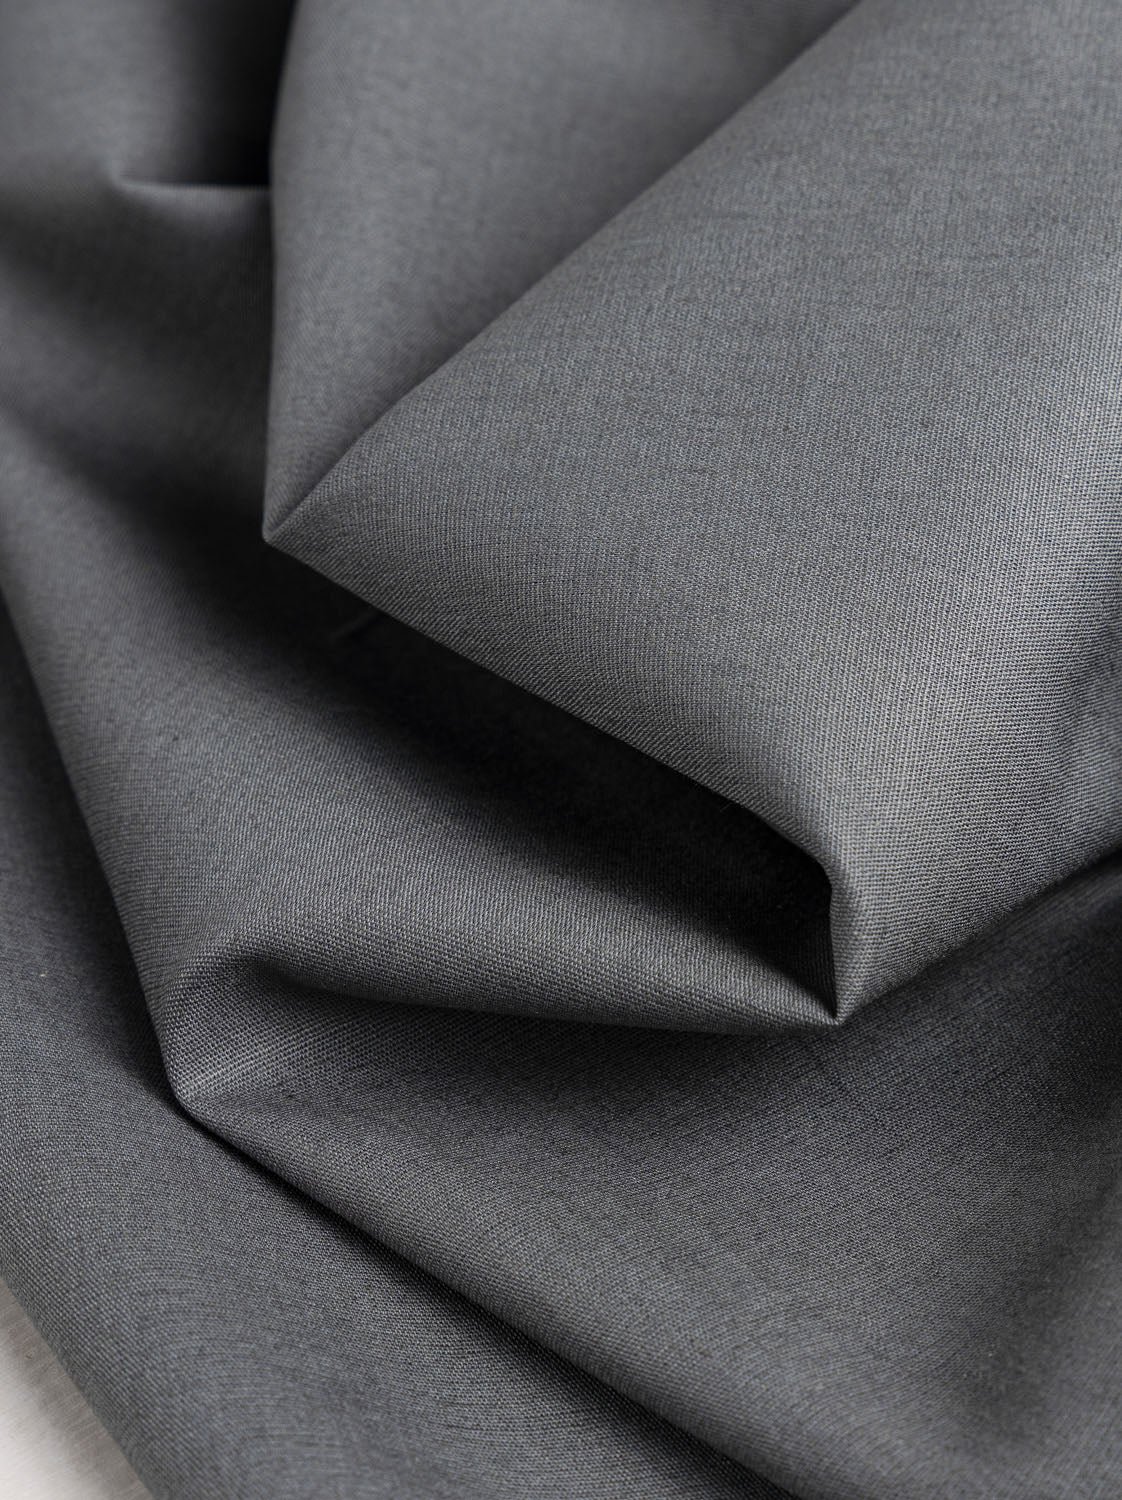 100% Cotton Fabric by The Yard - Solid Gray Fabric Material for Sewing &  Quilting - 44 Wide - 1 Yard, Light Gray